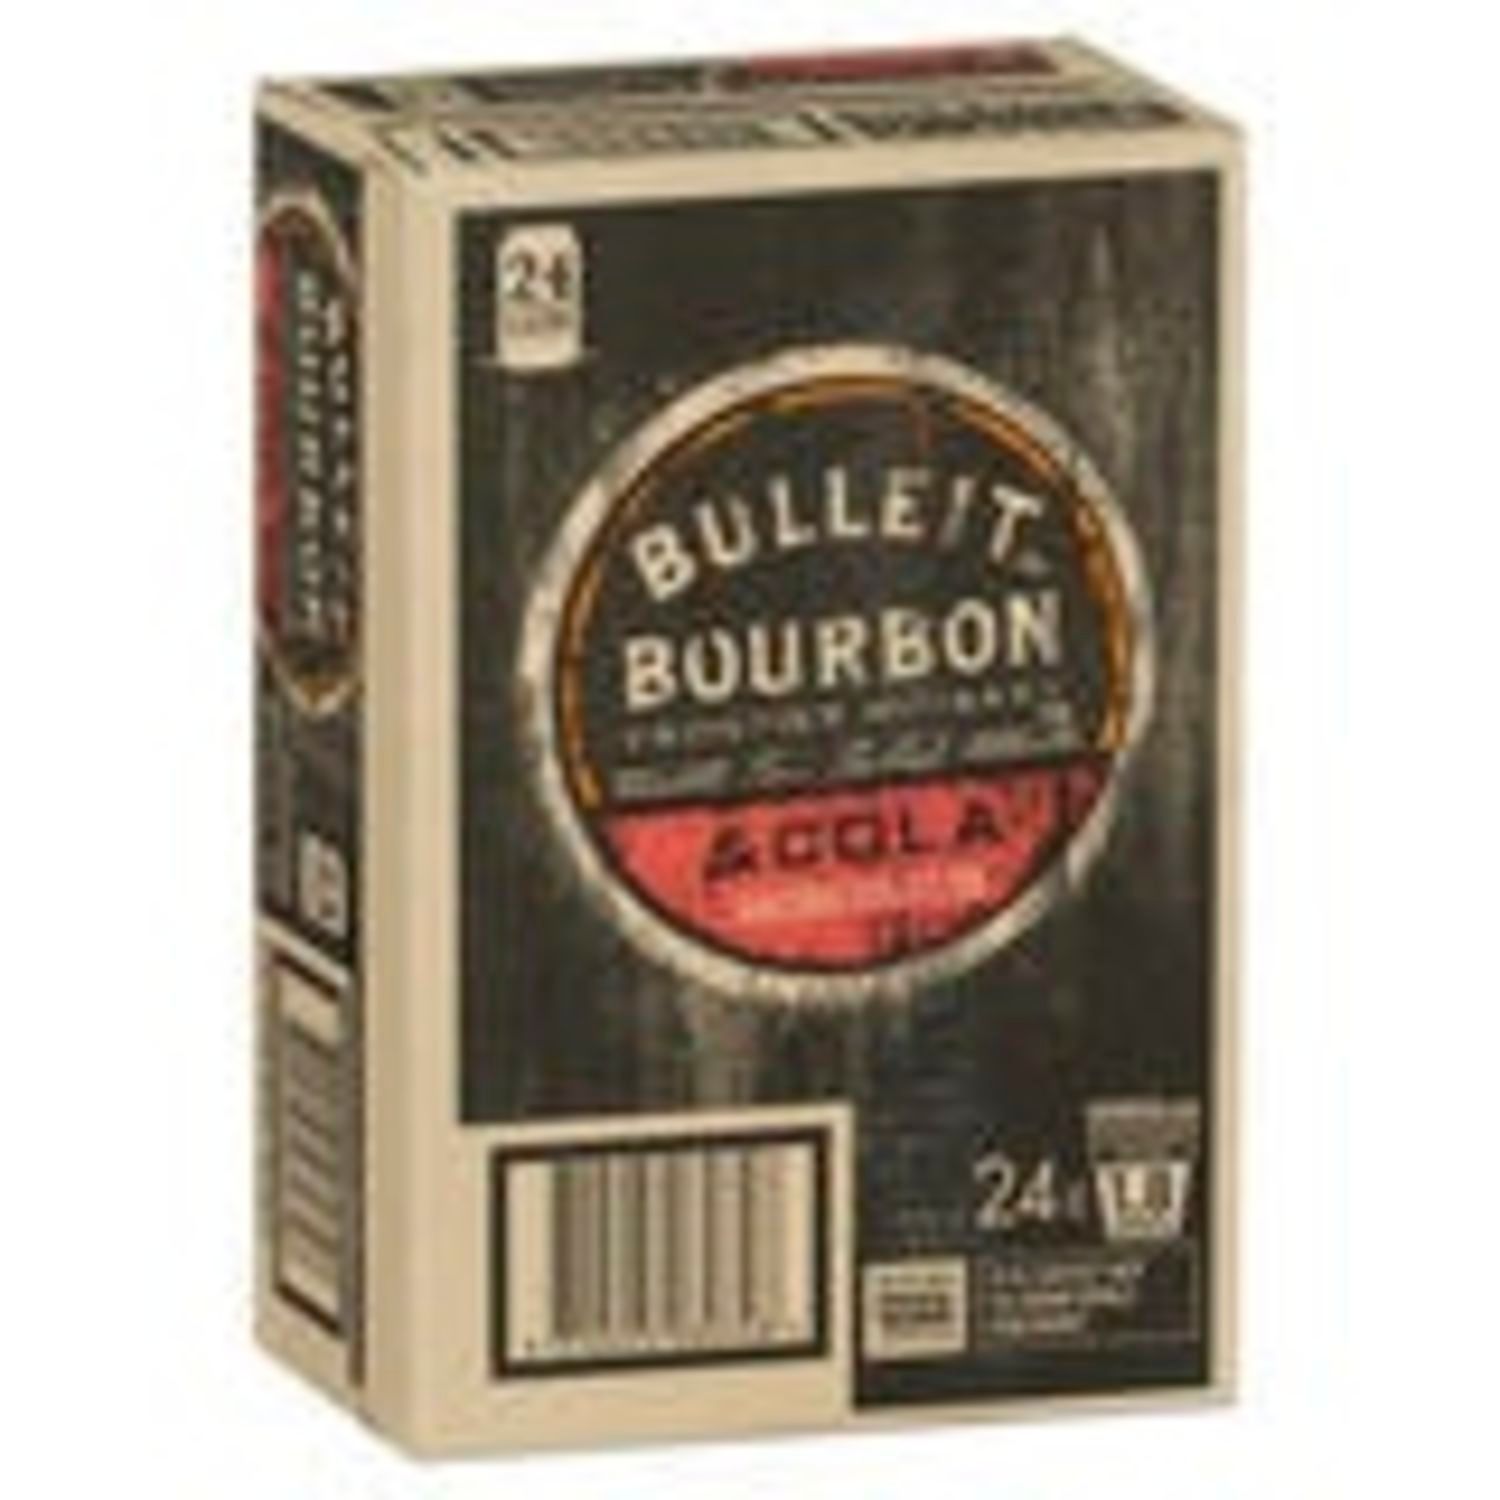 Bulleit Bourbon and Cola 9% Can 250mL 24 Pack